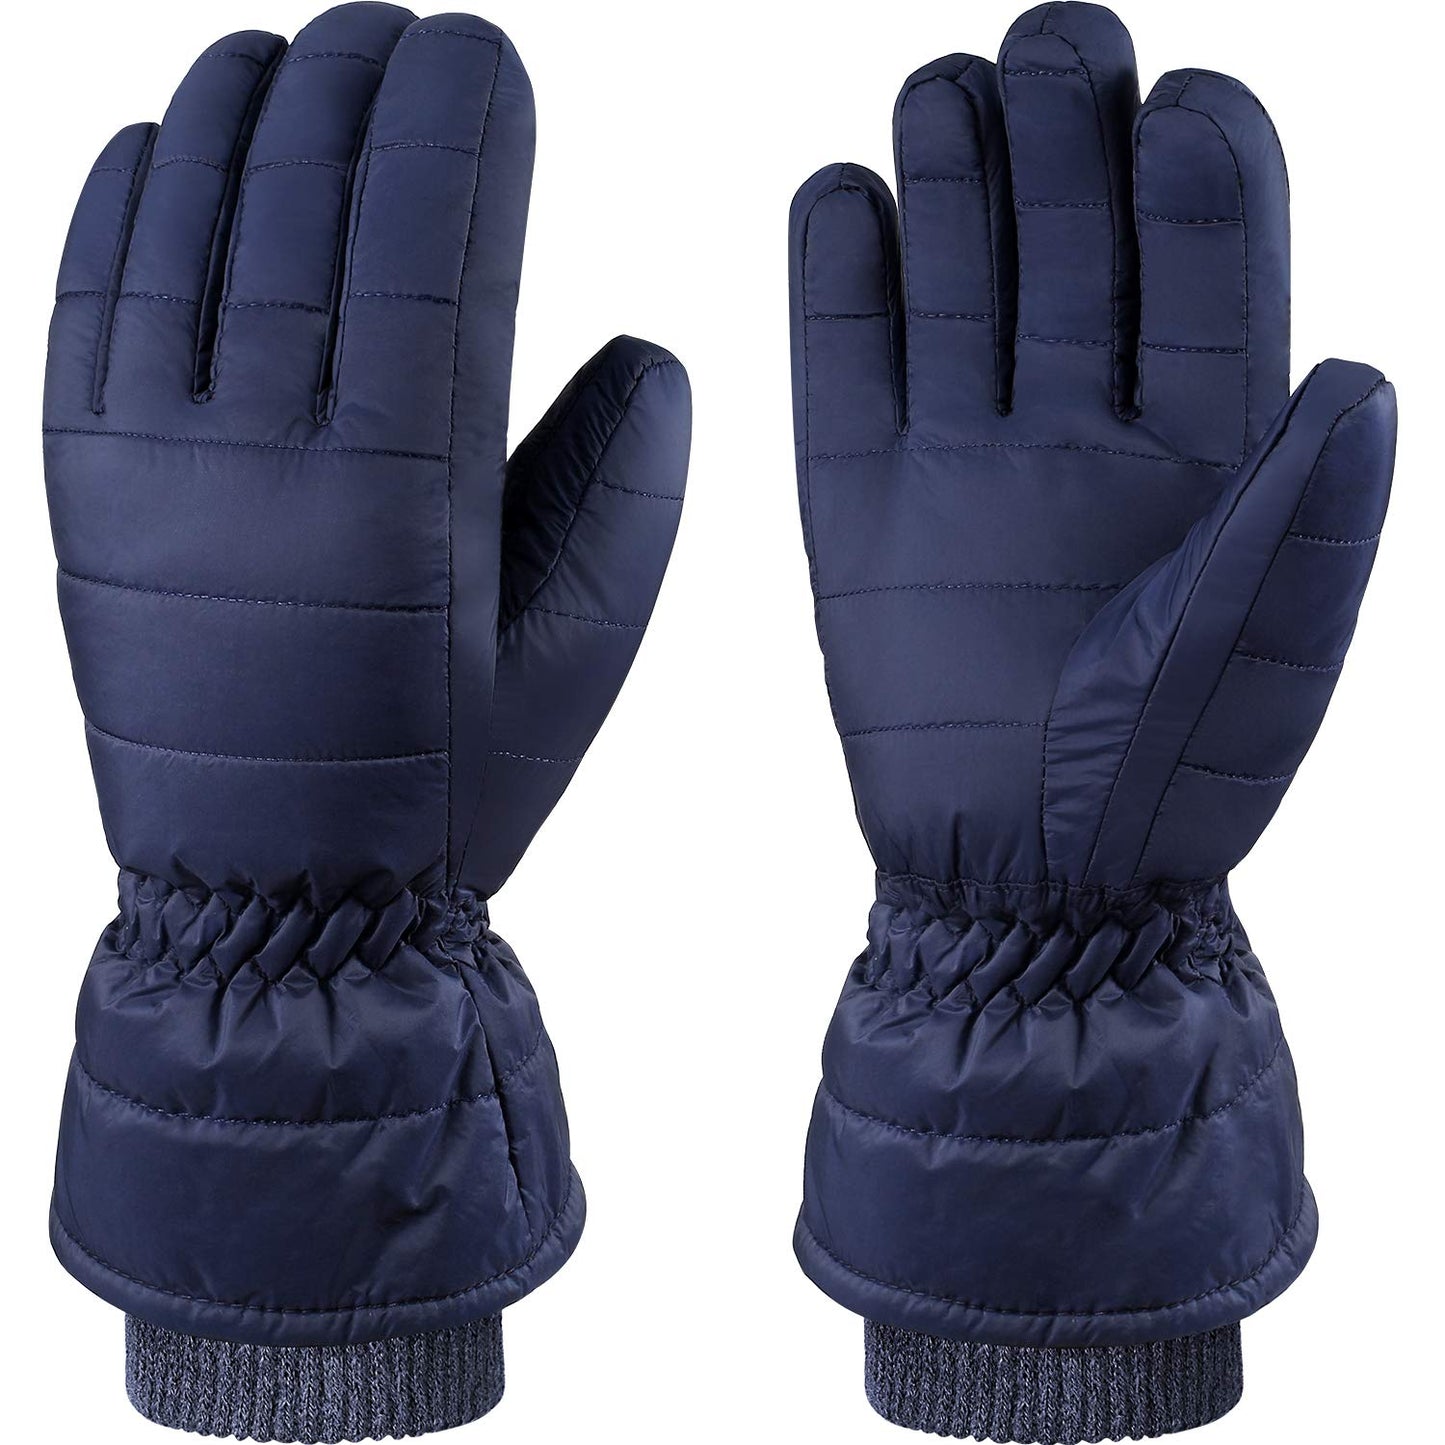 Andake 90% Duck Down Mittens Gloves For Men -20℉ Cold Weather Warm Winter Snow Gloves For Walking Jogging Work Outdoor (Small/Medium, BLUE-1) - Opticdeals